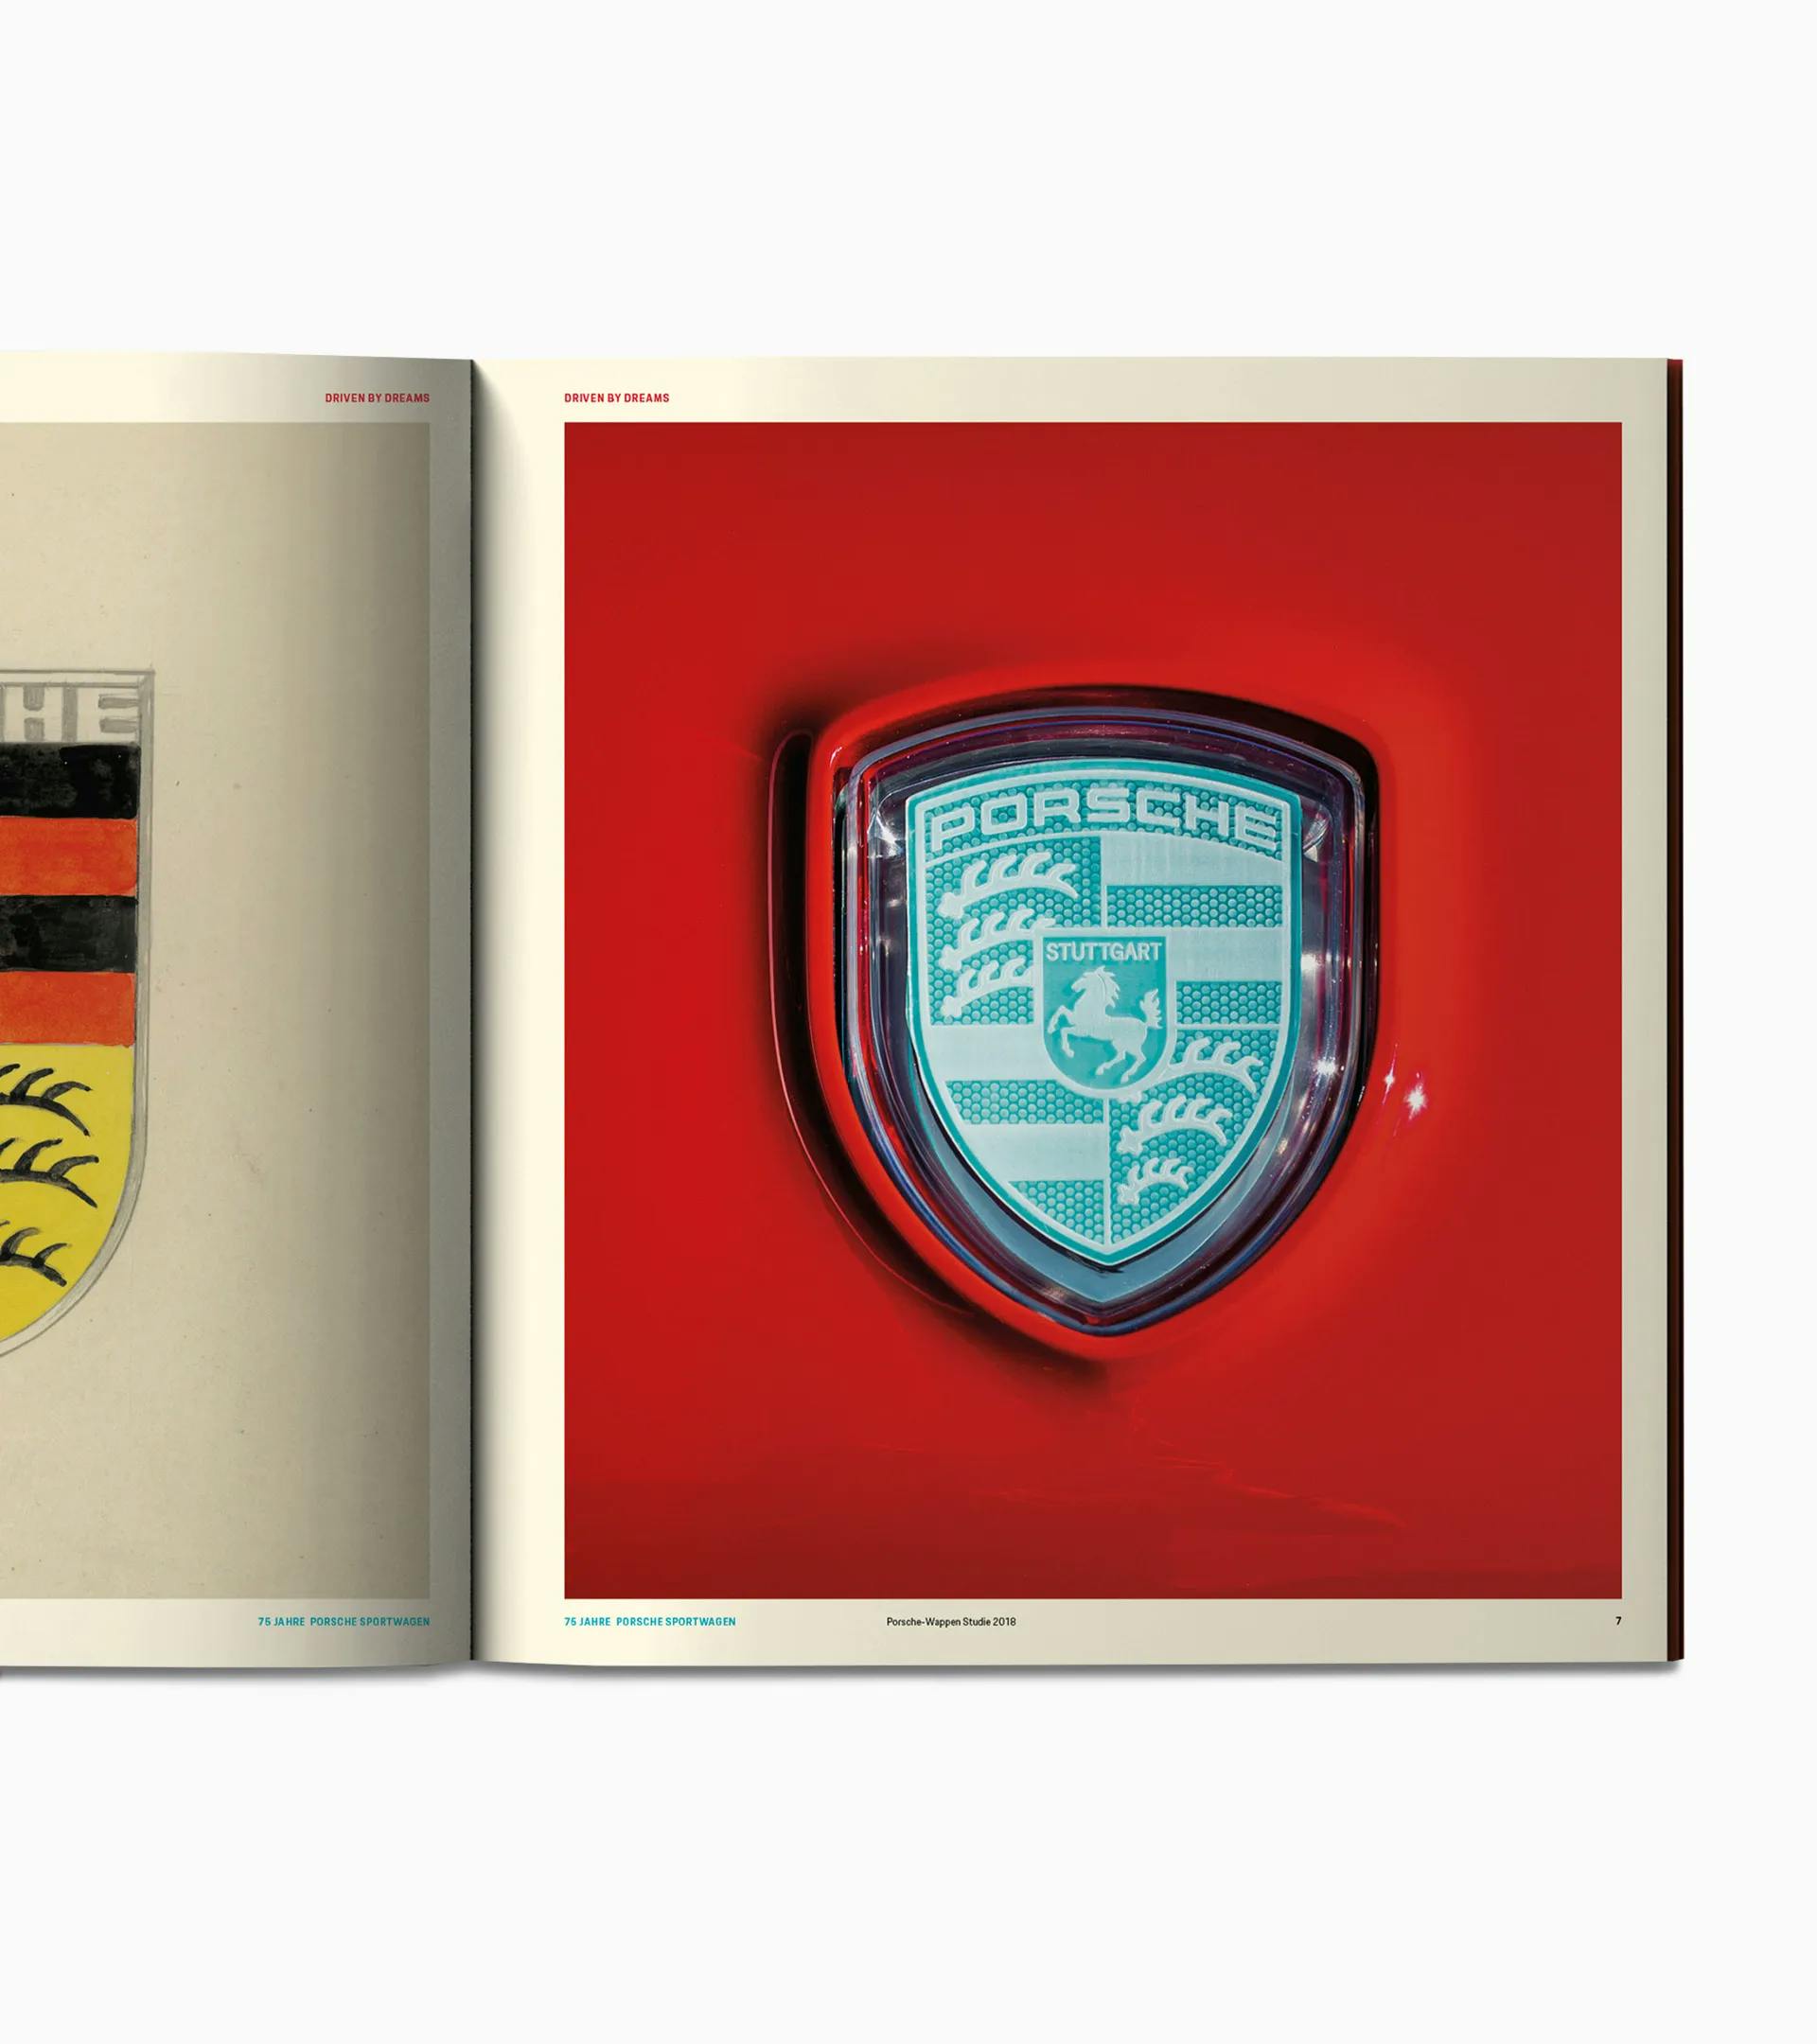 Book 'Driven by Dreams - 75 years of Porsche sports cars' book 2